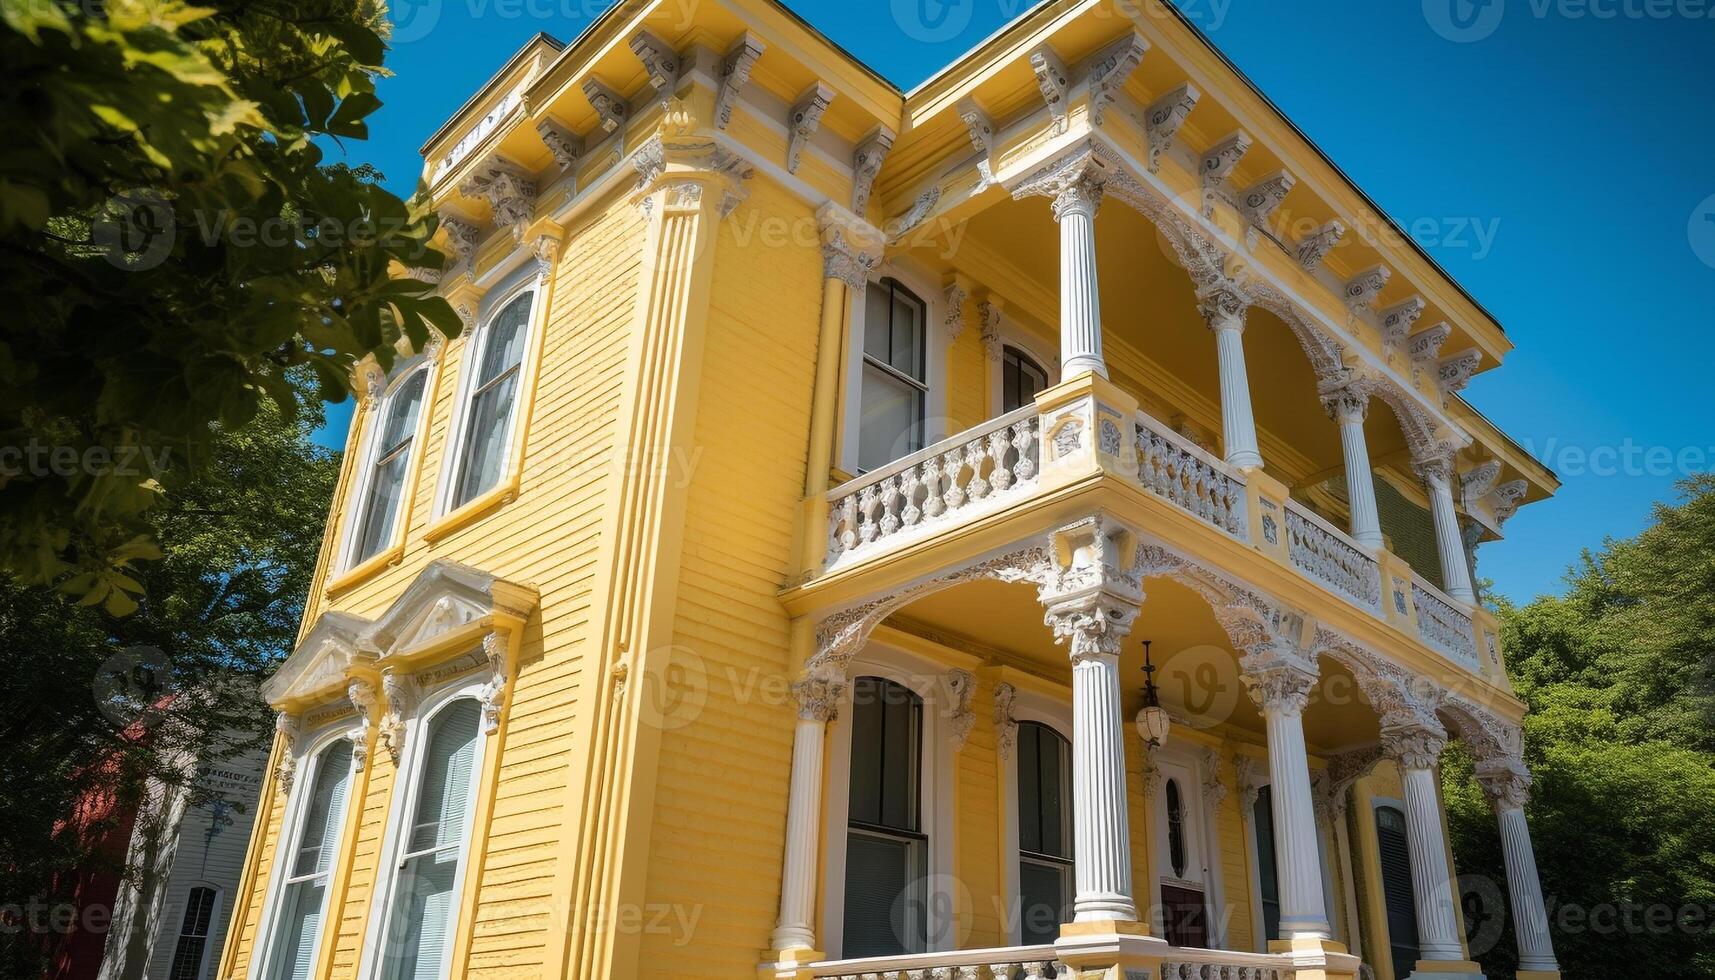 The old fashioned colonial building with yellow facade exudes elegance generated by AI photo